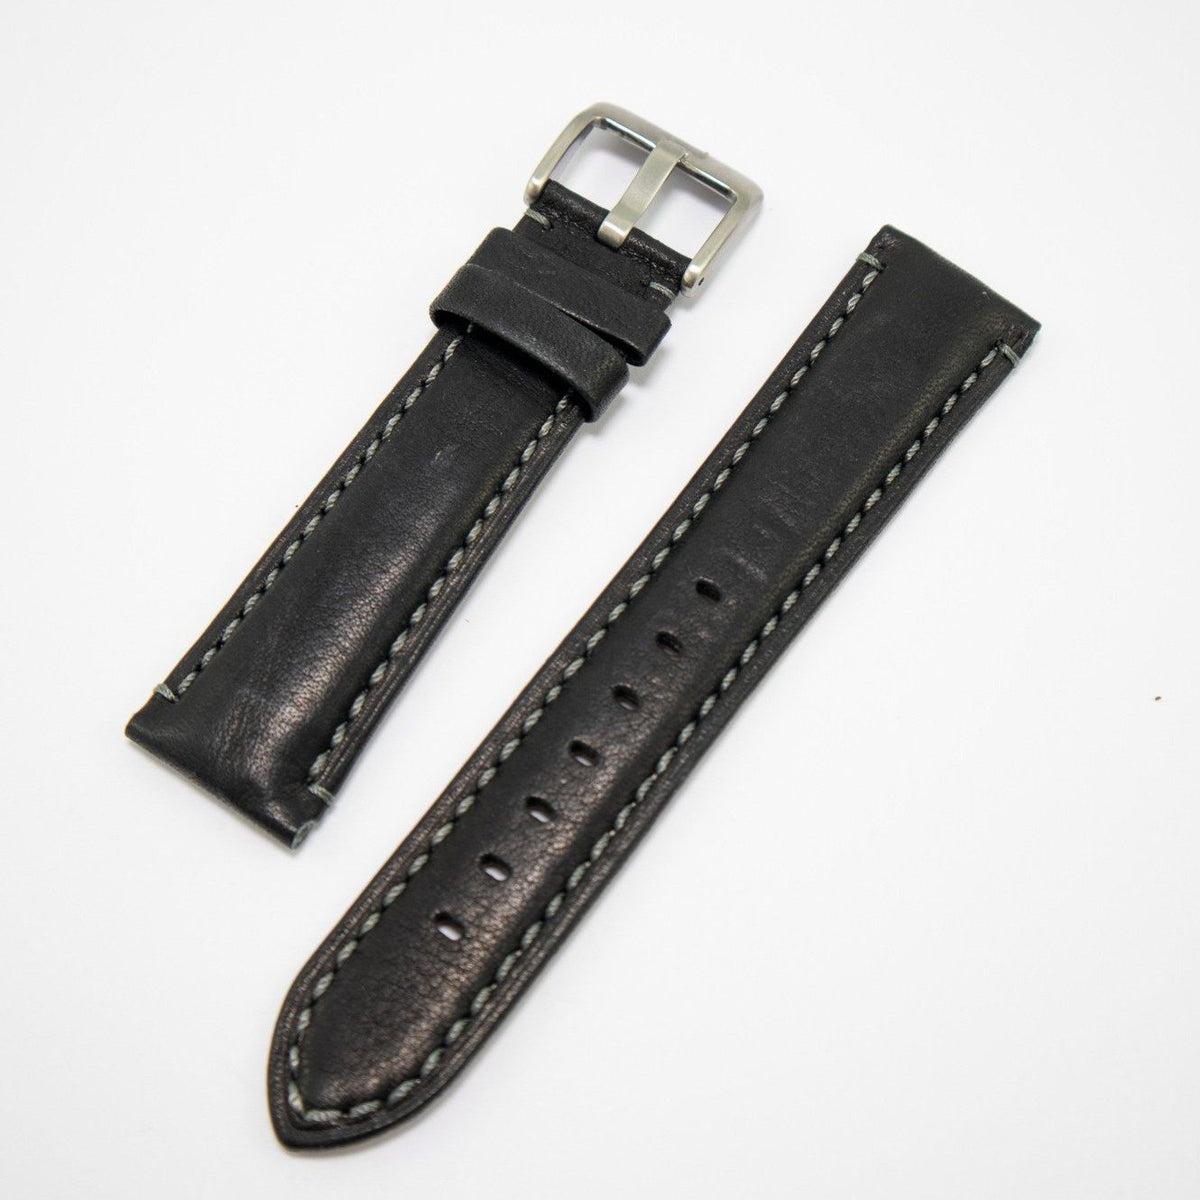 Alpine Watchstrap - Padded Stitched Waterproof Leather